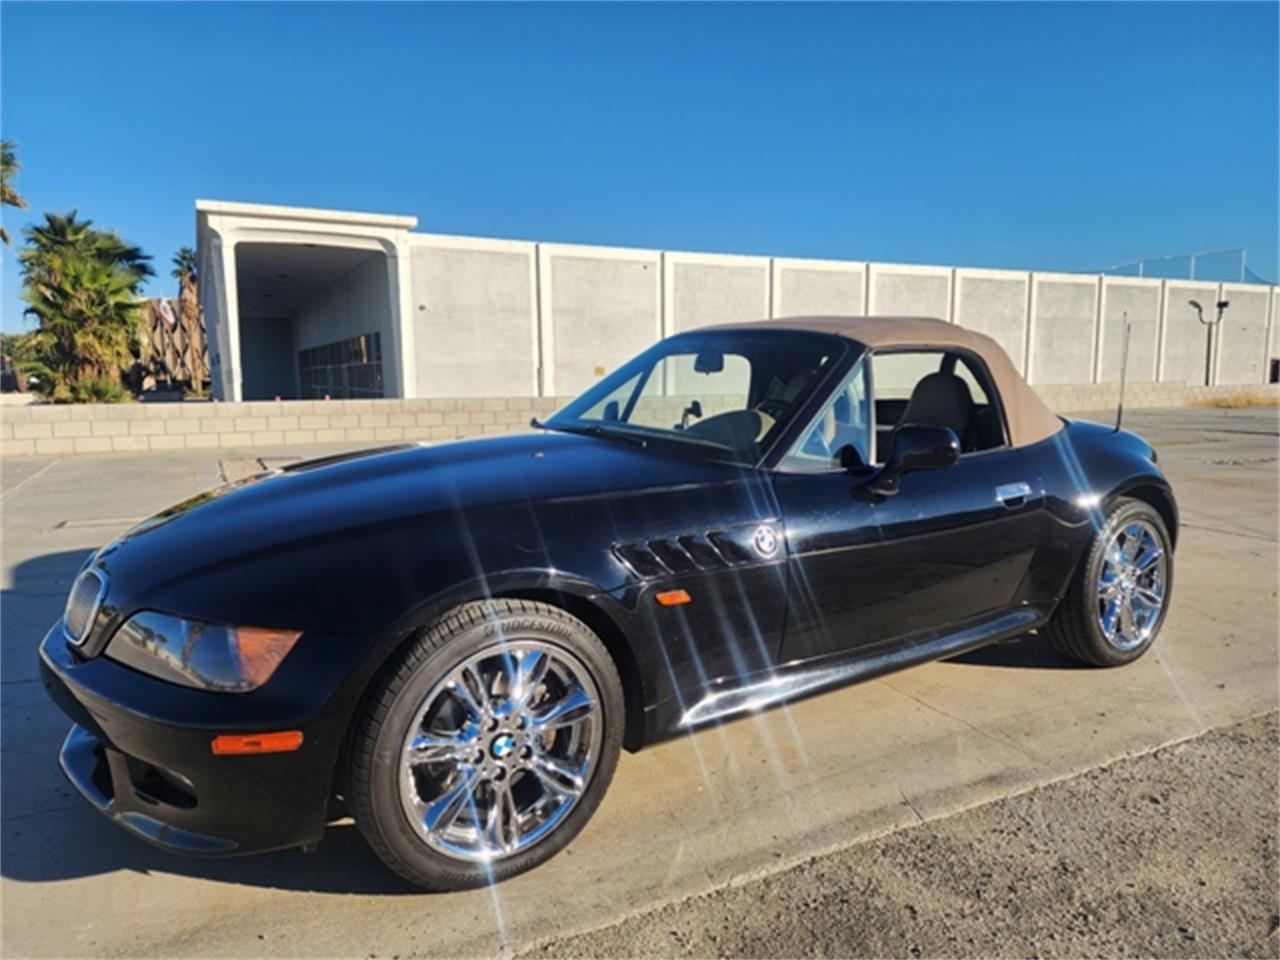 For Sale at Auction: 1998 BMW Z3 in Palm Springs, California for sale in Palm Springs, CA